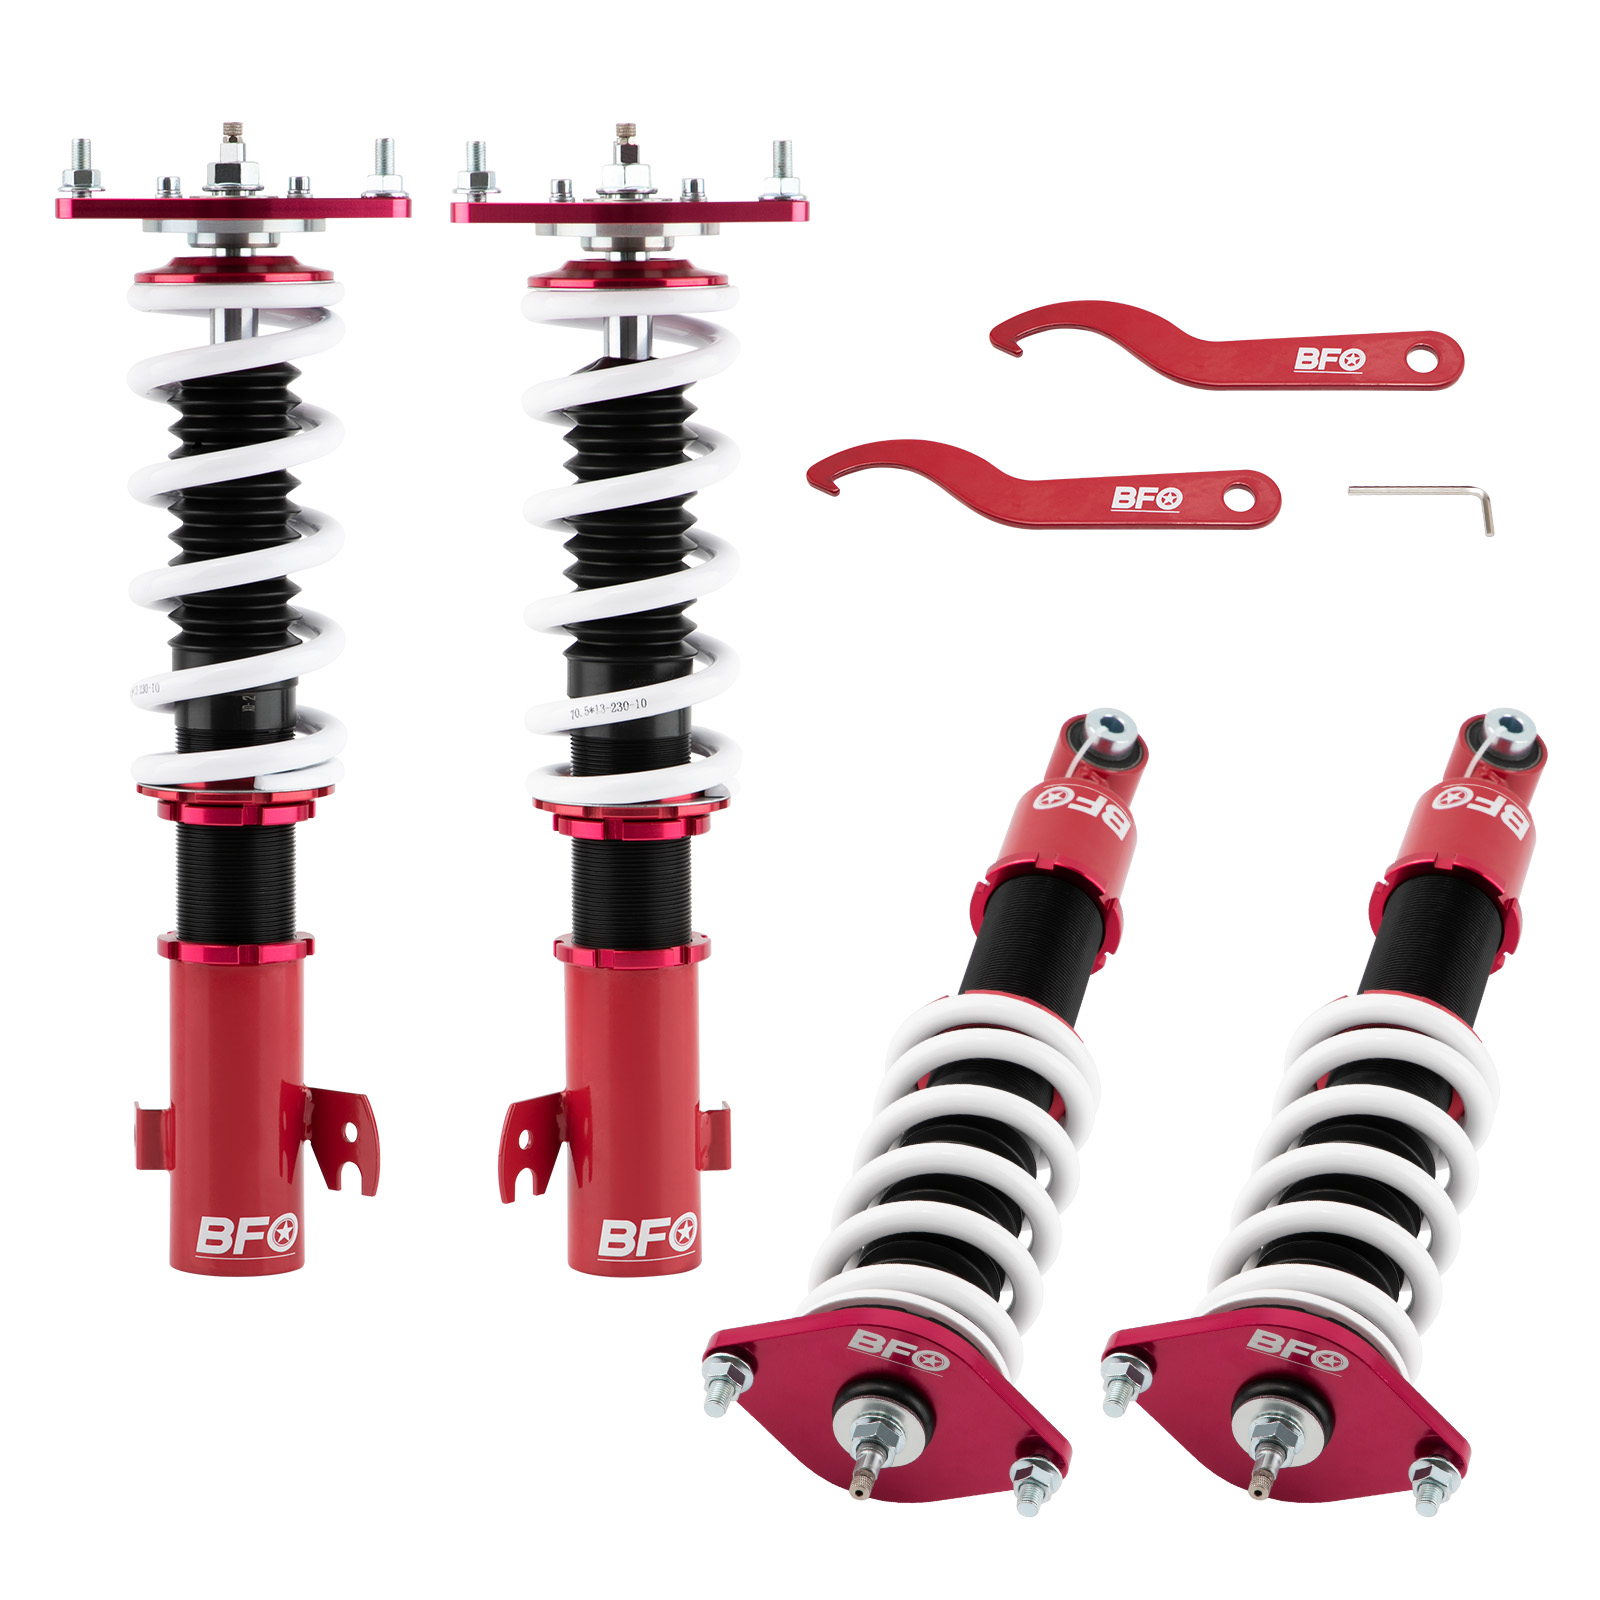 BFO 24 Way Damper Coilovers Lowering Suspension Kit For Subaru Forester 2009-13